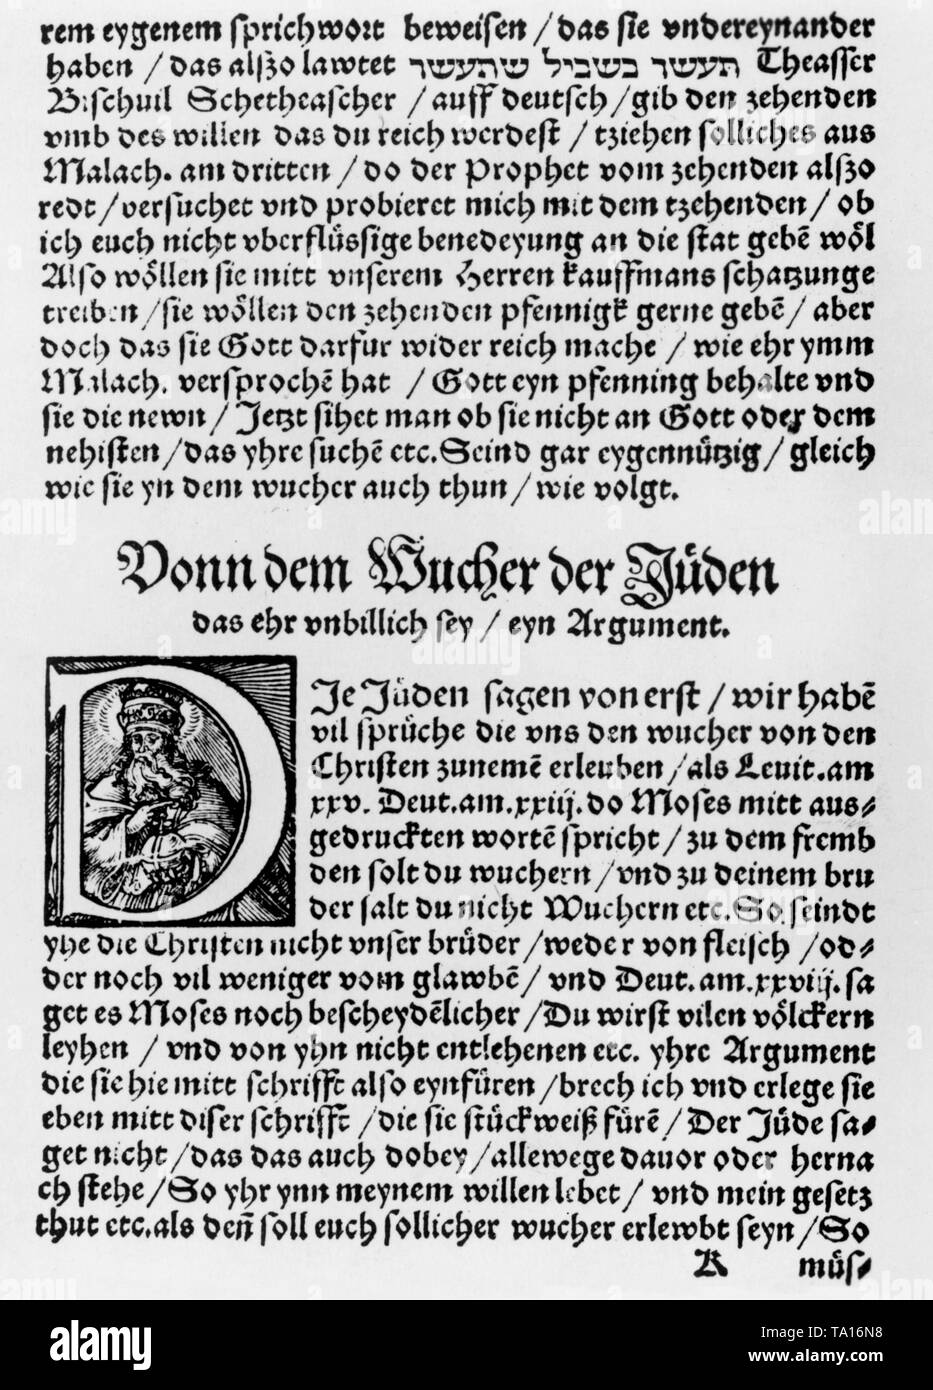 Excerpt from the work of Antonius Margaritha, a Jewish convert. It is considered to be the source of early-modern anti- Jewish writings, such as of Martin Luther's. Stock Photo